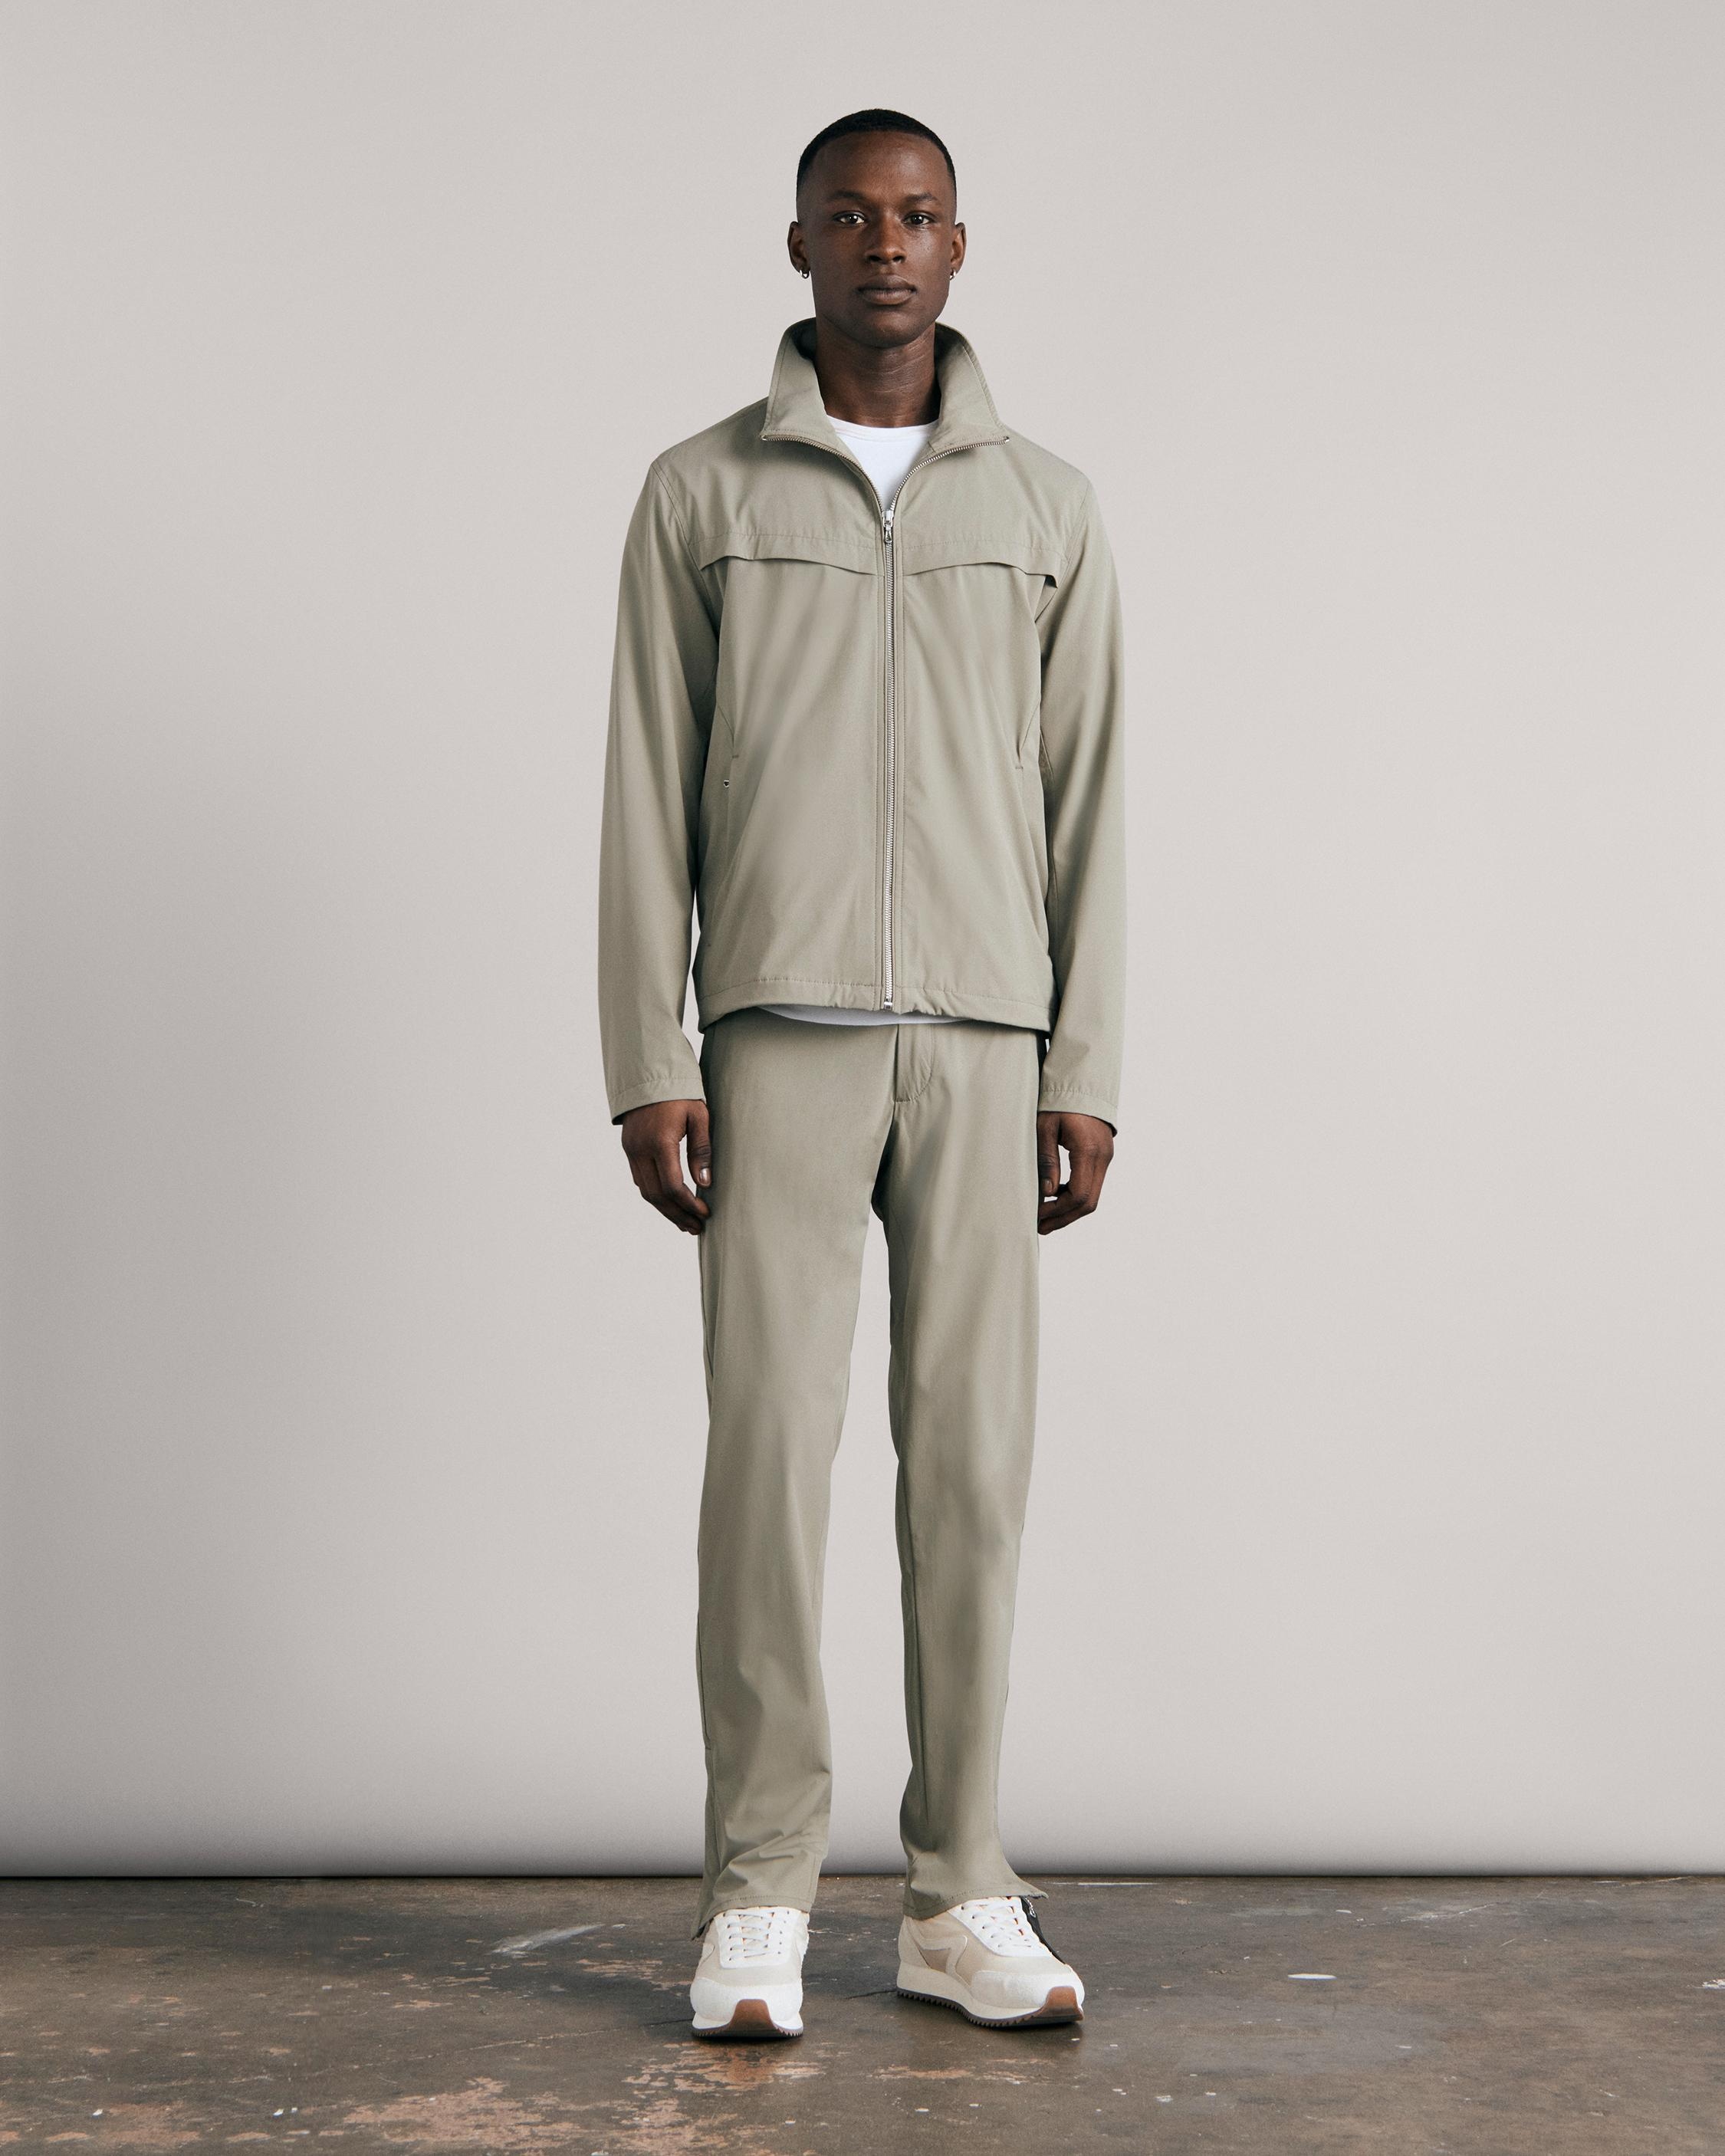 Pursuit Zander Technical Track Pant
Relaxed Fit - 2